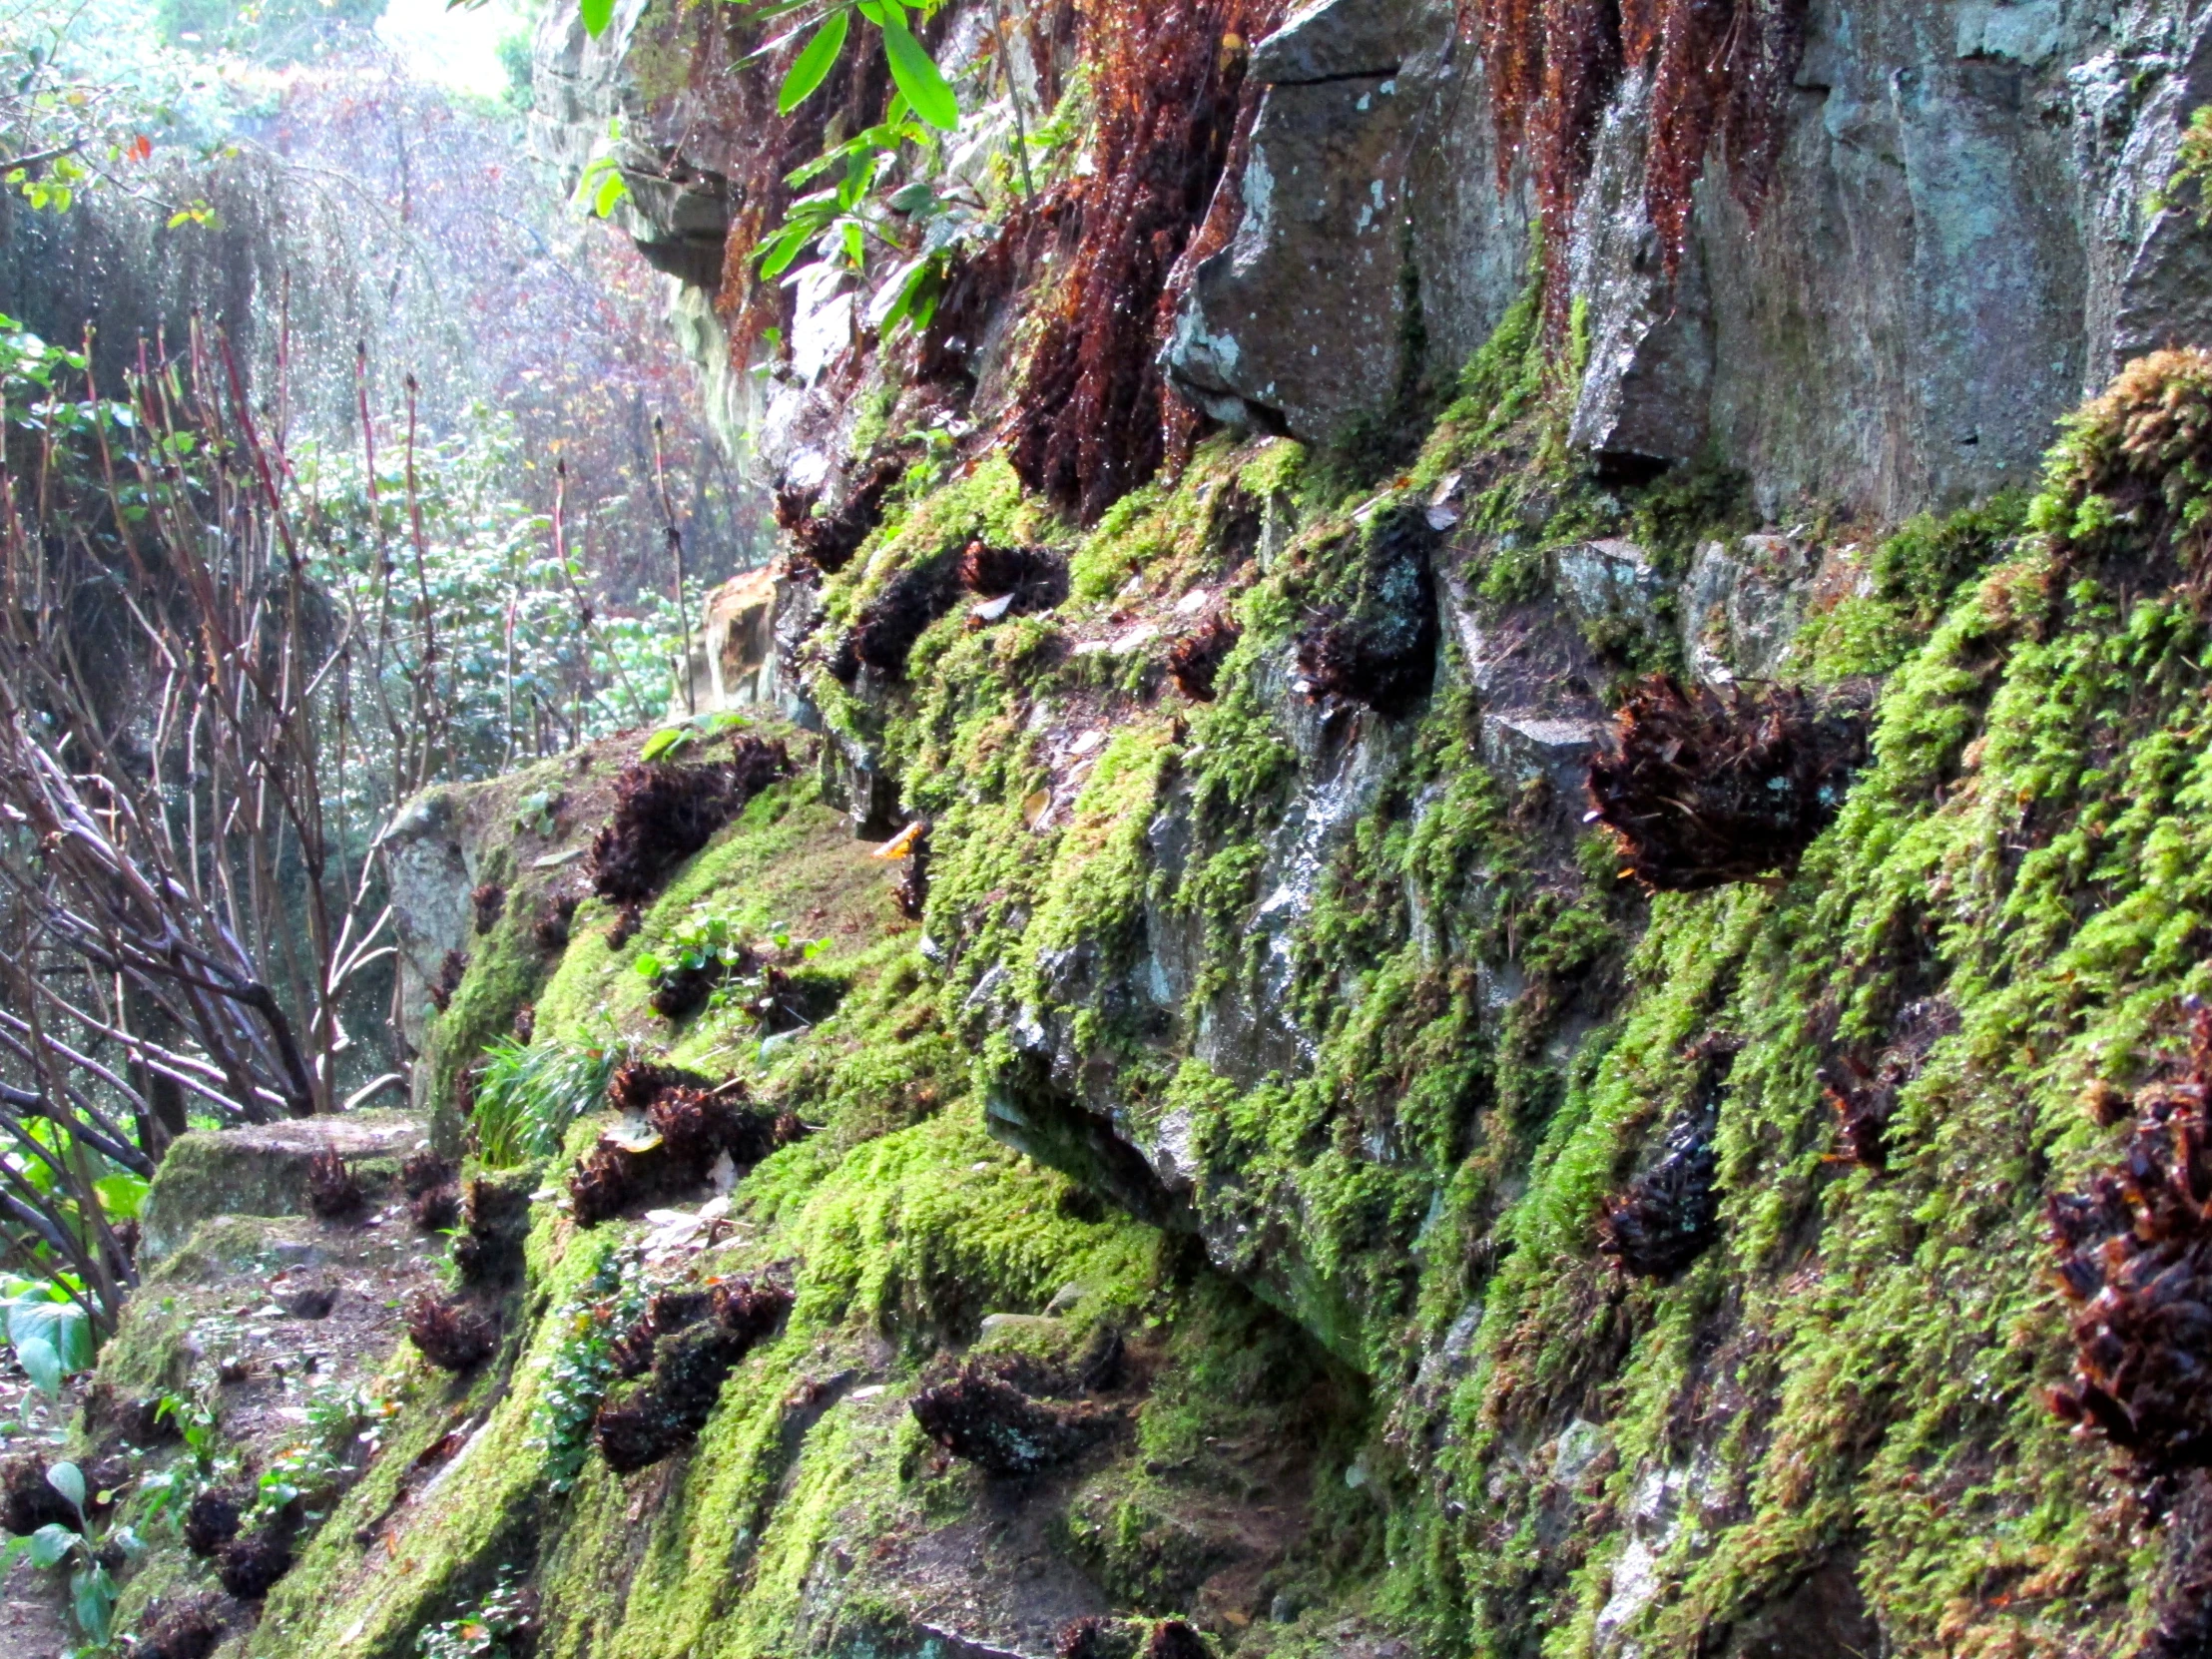 green mossy rocks cover the cliff with pine cones on them